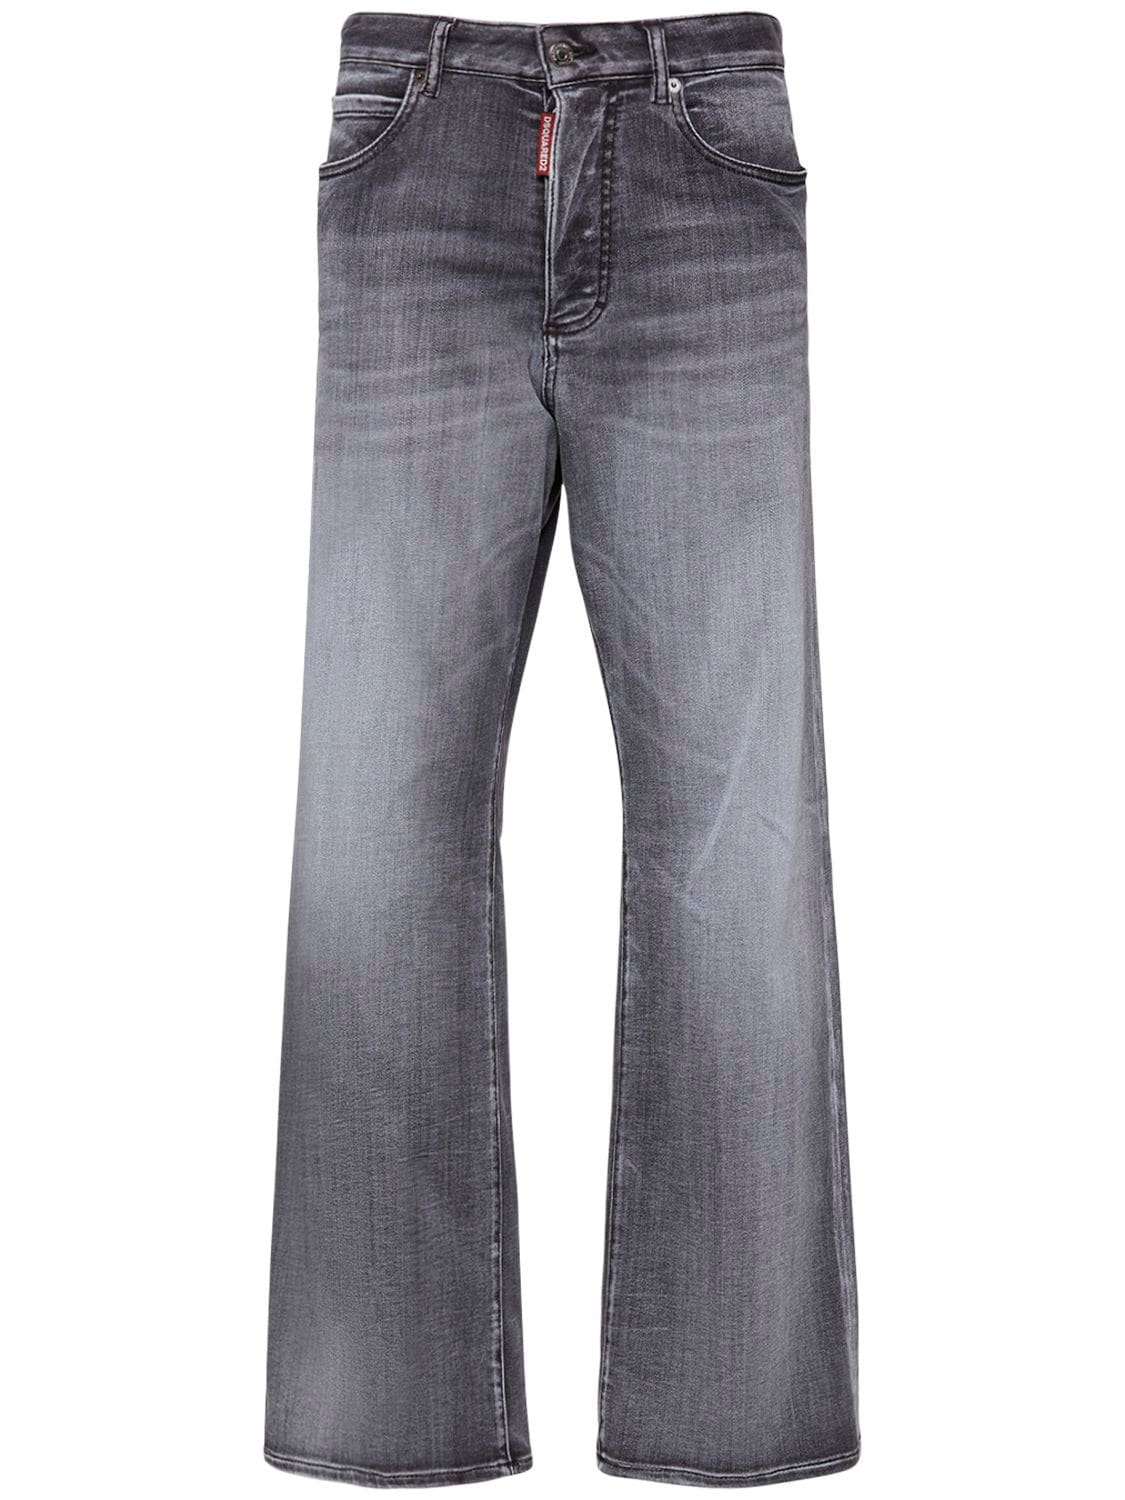 Image of San Diego Denim Flared High Rise Jeans